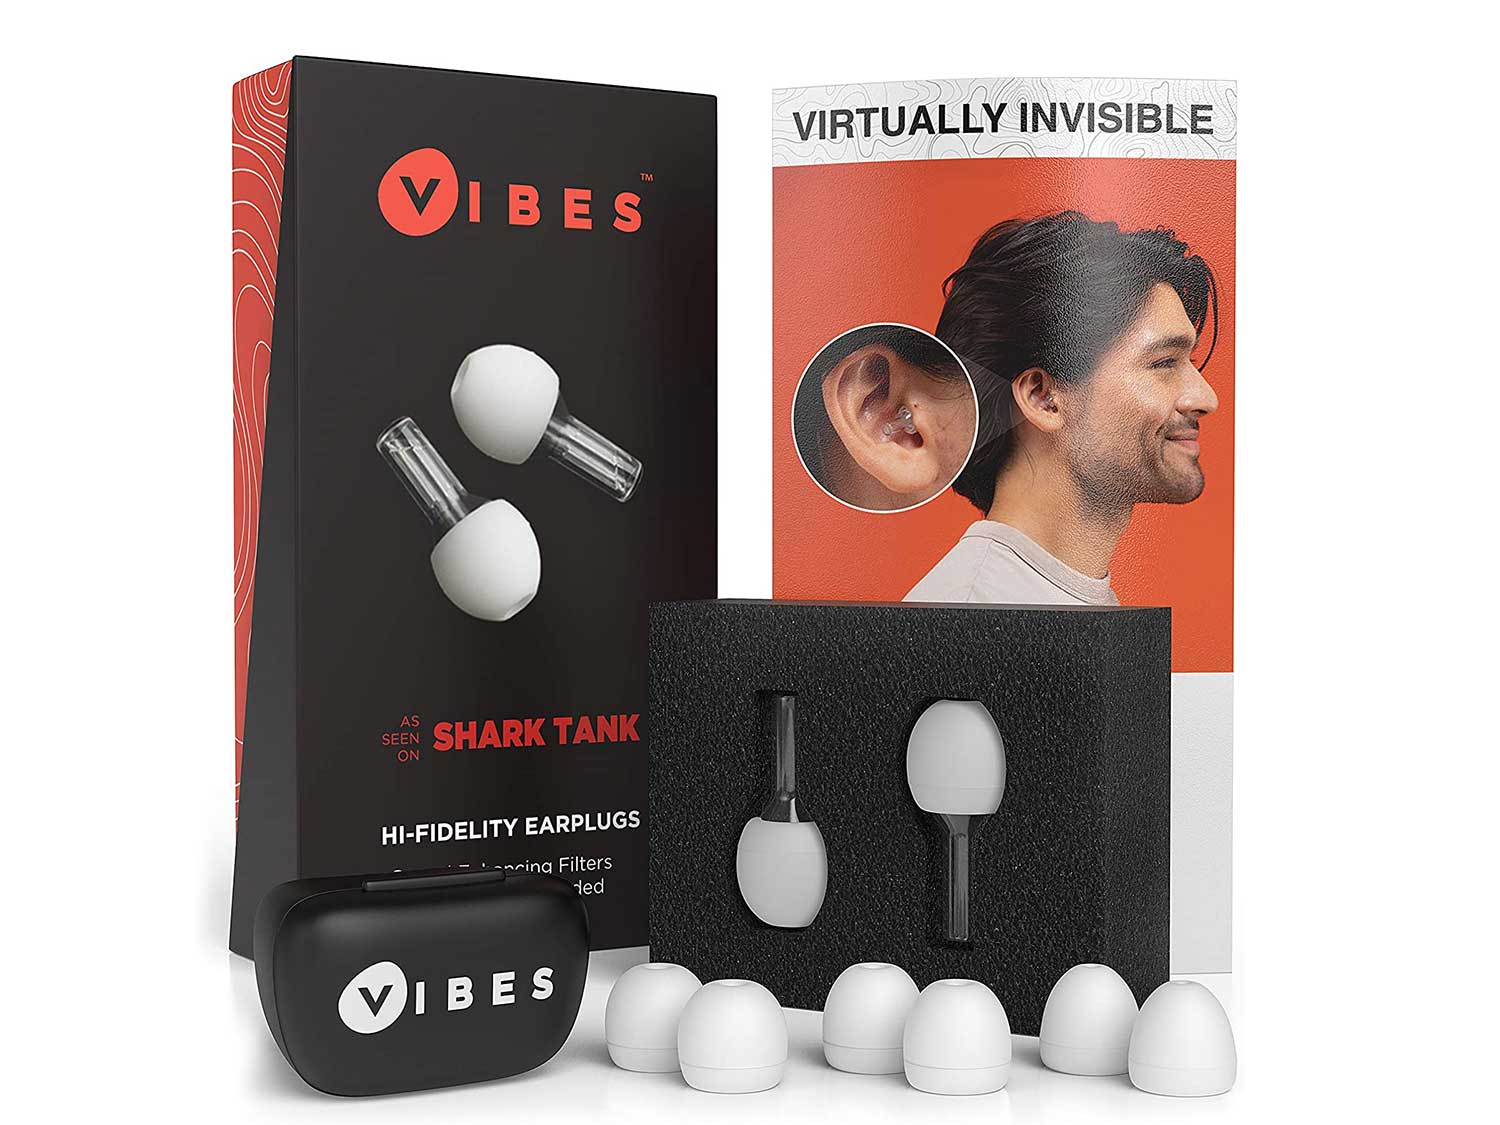 Vibes High Fidelity Earplugs - Invisible Ear Plugs For Concerts, Musicians, Motorcycles, Airplanes, Raves, Work Noise Reduction, Hearing Protection - Fits Small Medium Large - As Seen On Shark Tank